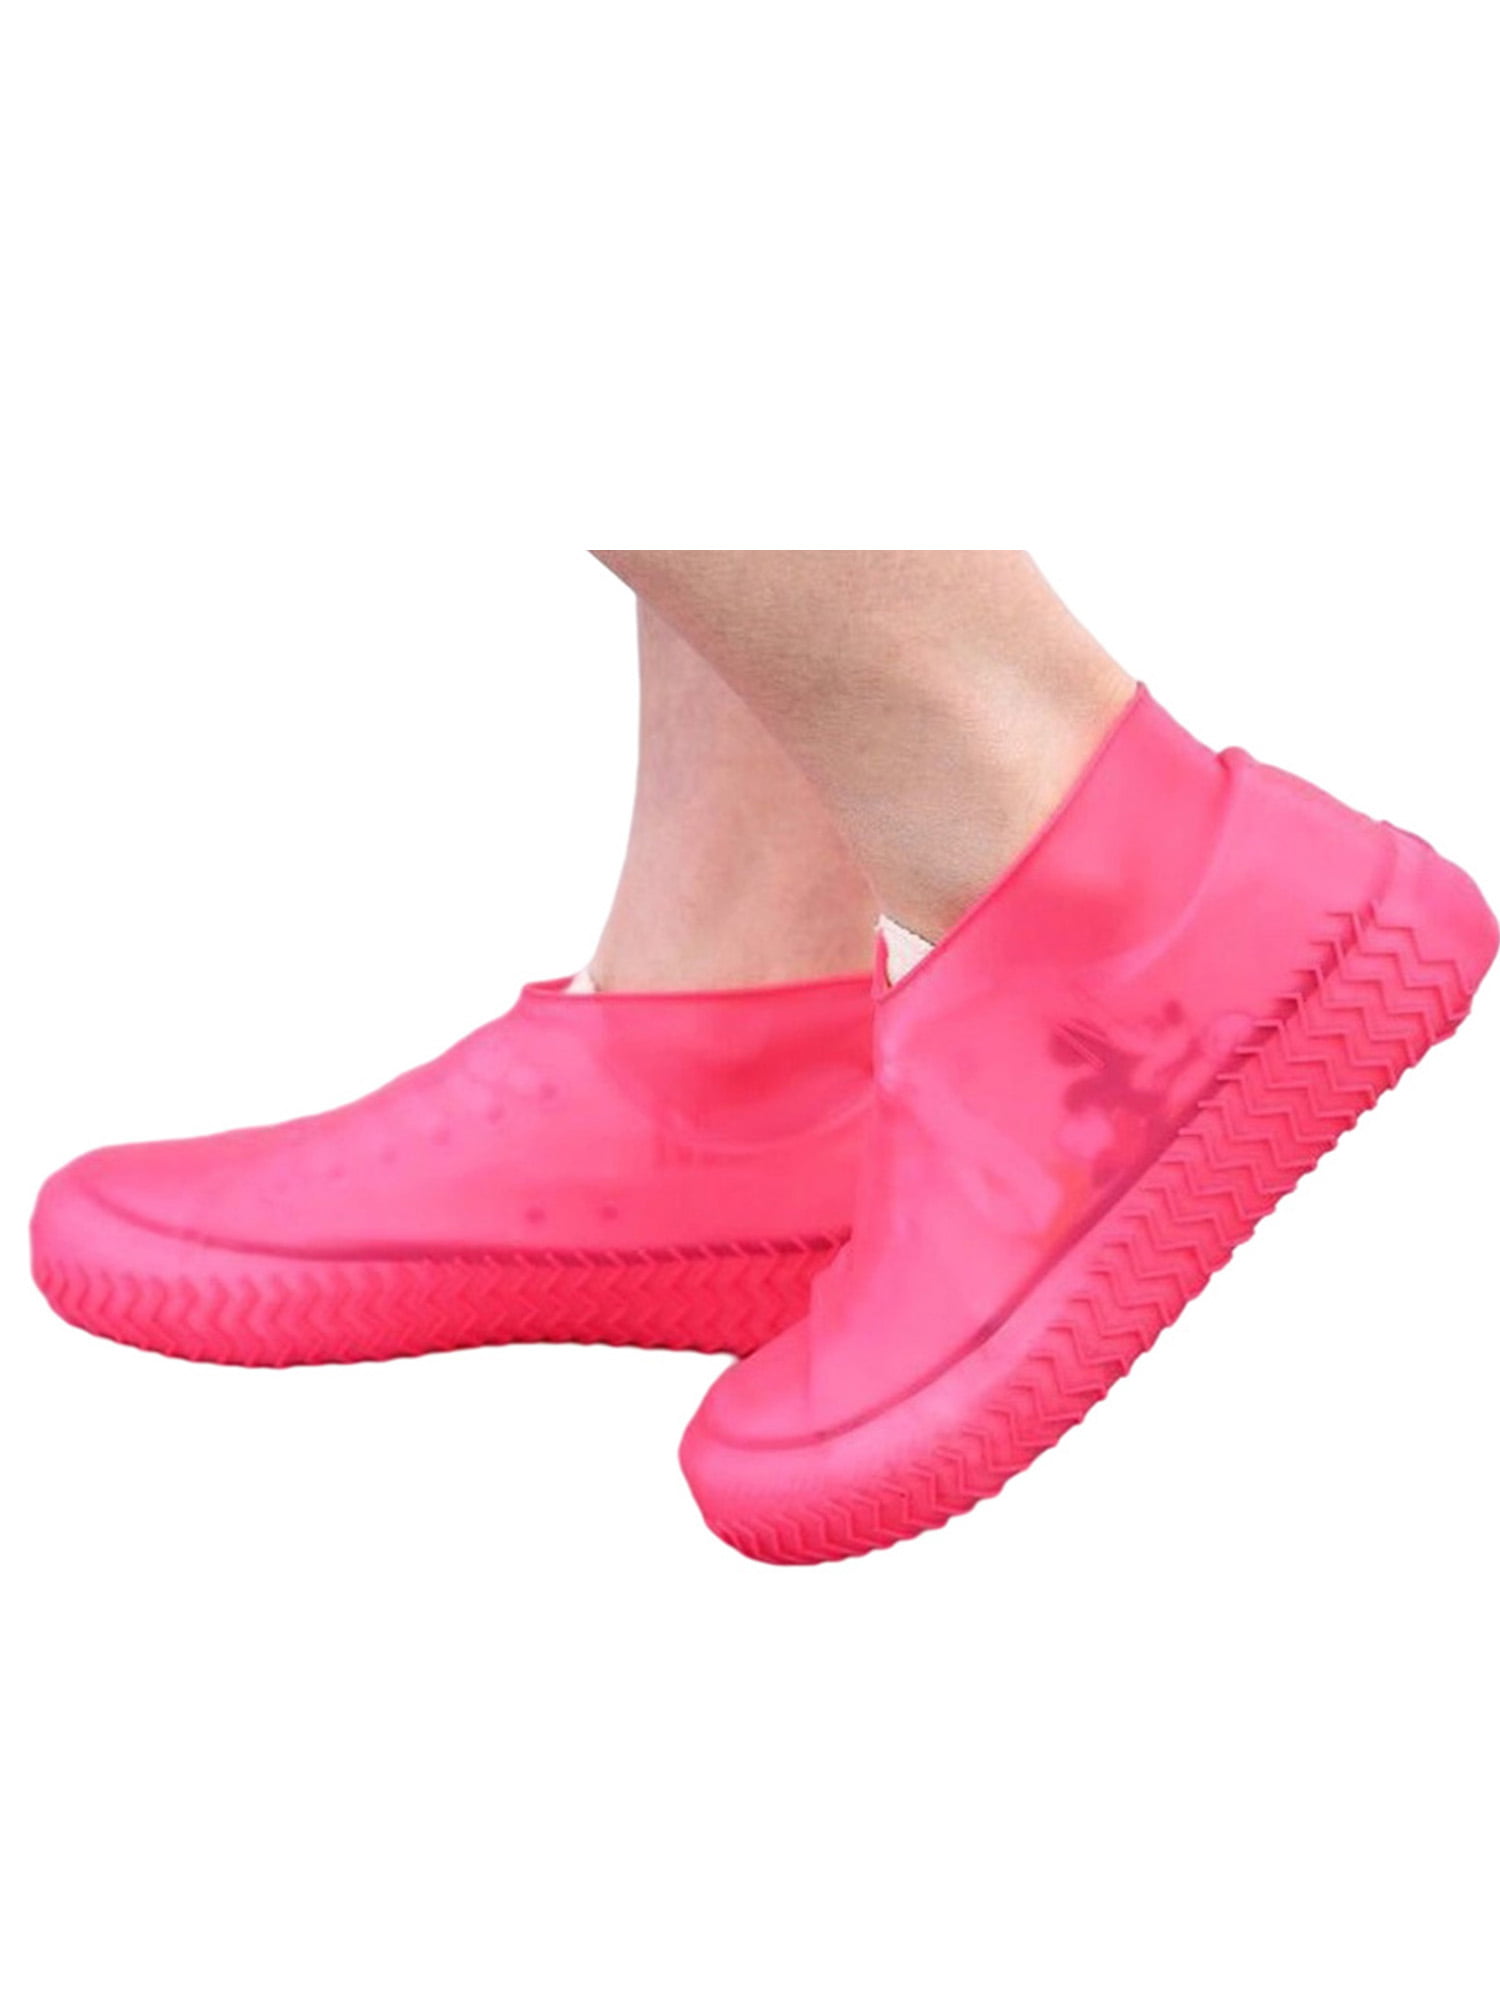 New Covers Accessories Slip-resistant Overshoes Boot  Latex Rain Shoes Rubber 